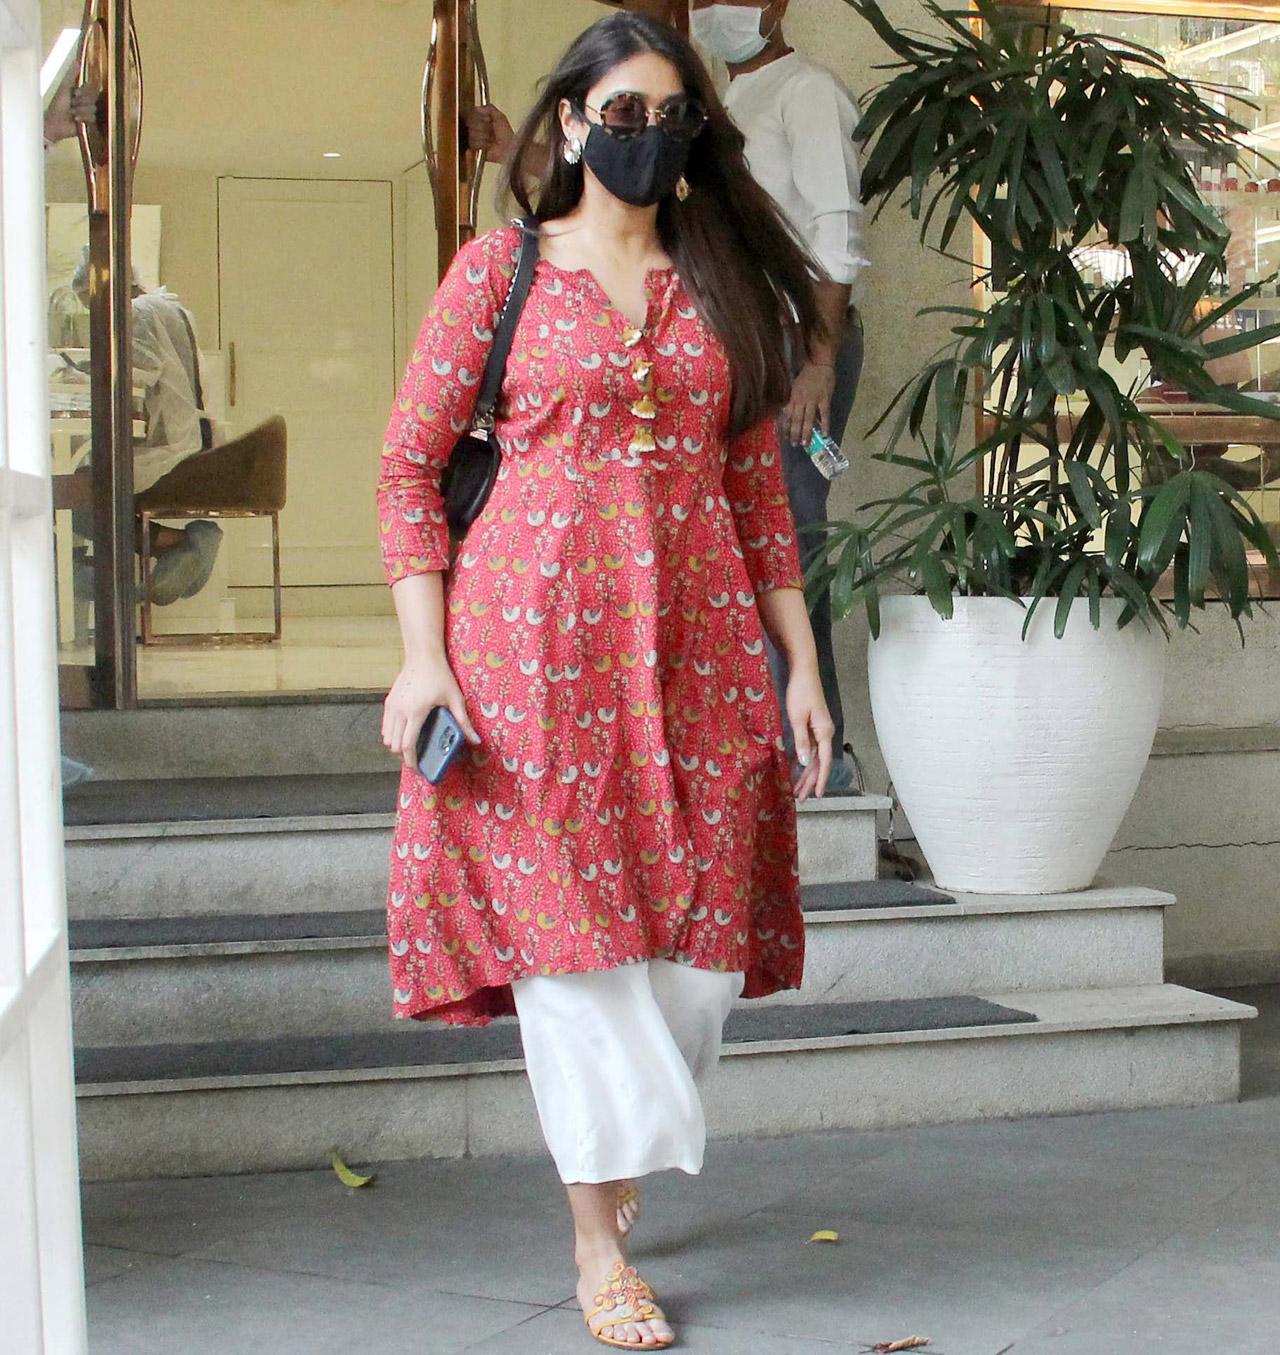 Ileana D'Cruz was spotted at a popular salon in Bandra. The Pagalpanti actress looked pretty in her traditional attire as she was clicked exiting the salon. Last week, Ileana shared a twist of nostalgia from her holiday this time last year, in the process confessing she is a beach bum for life. Ileana posted the picture on Instagram Stories, where she is seen lying in a hammock wearing black swimsuit, against the backdrop of a blue sea. On the image, she wrote: 